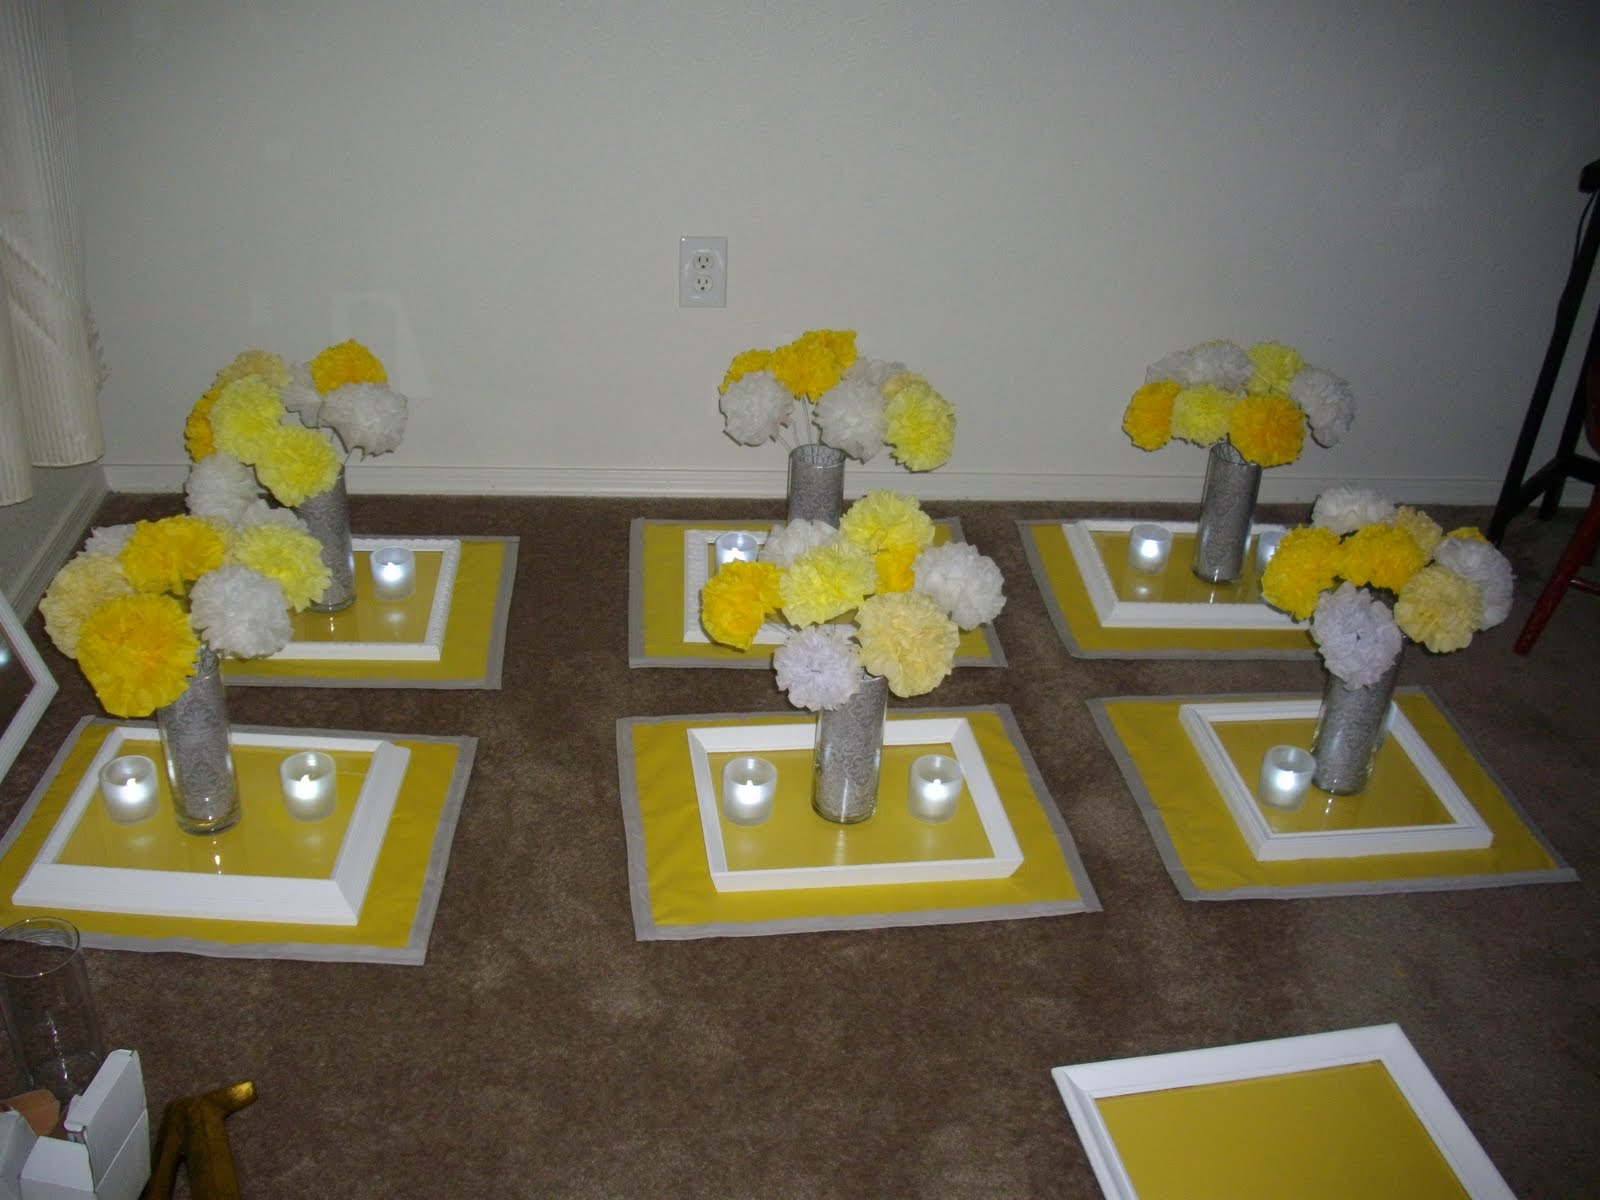 I am on a strict budget for my wedding. The centerpieces consist of yellow